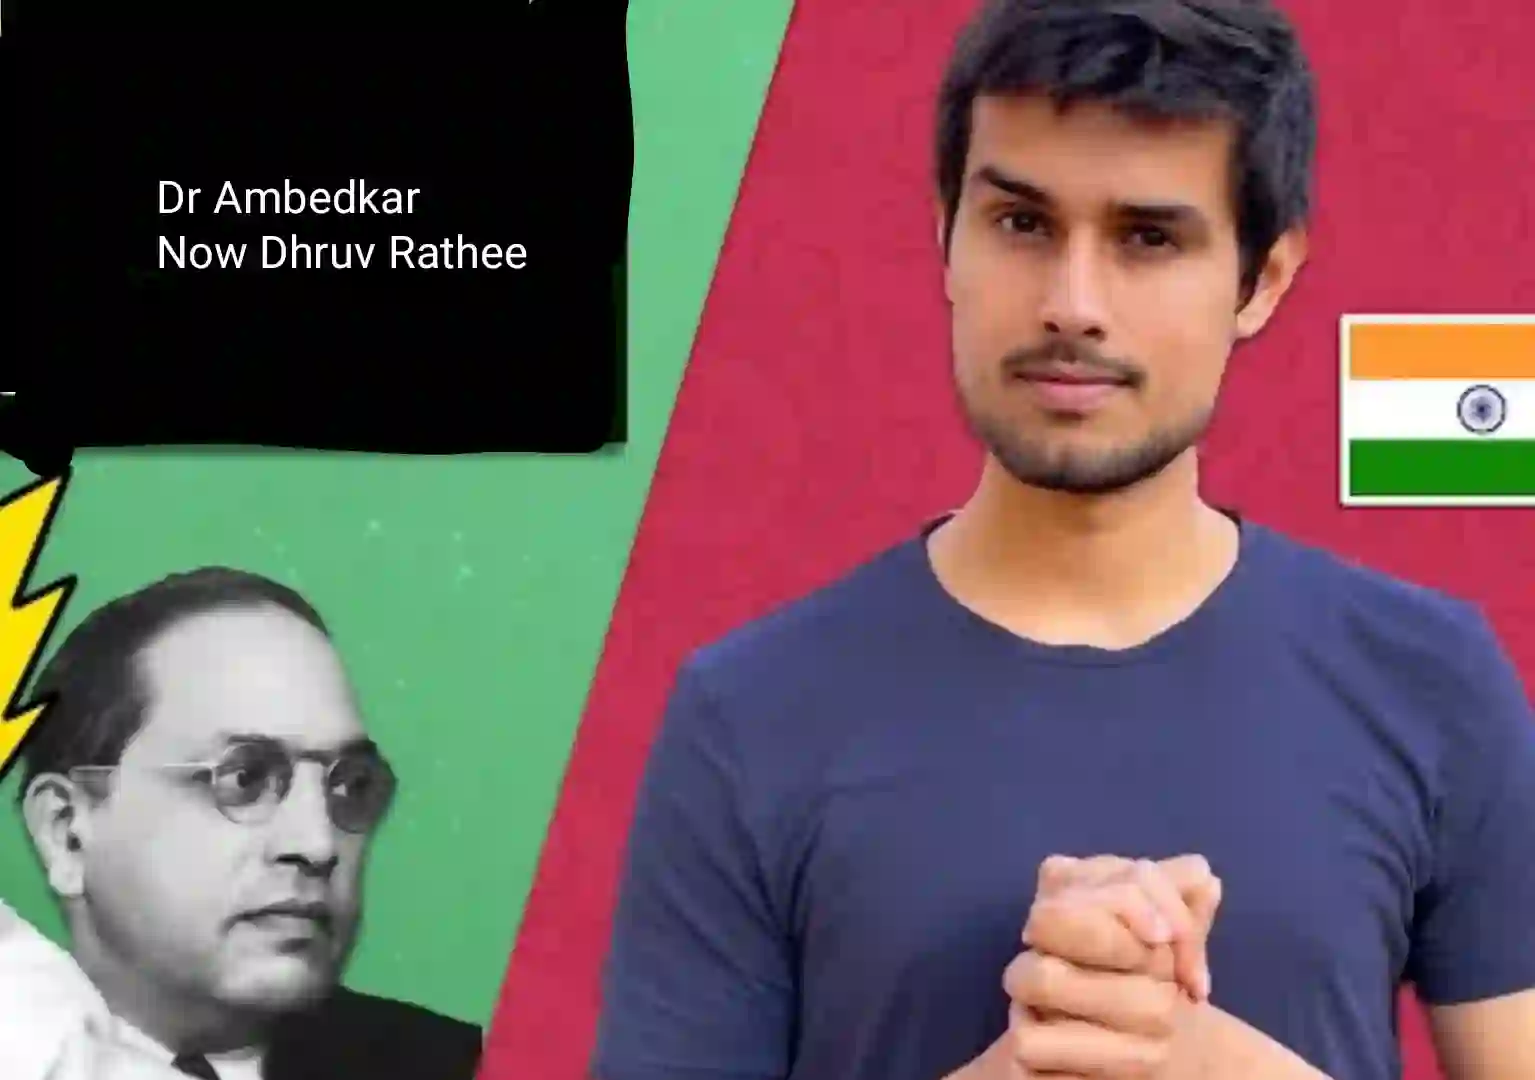 Dr. Ambedkar of Searching Dr. Ambedkar in current society